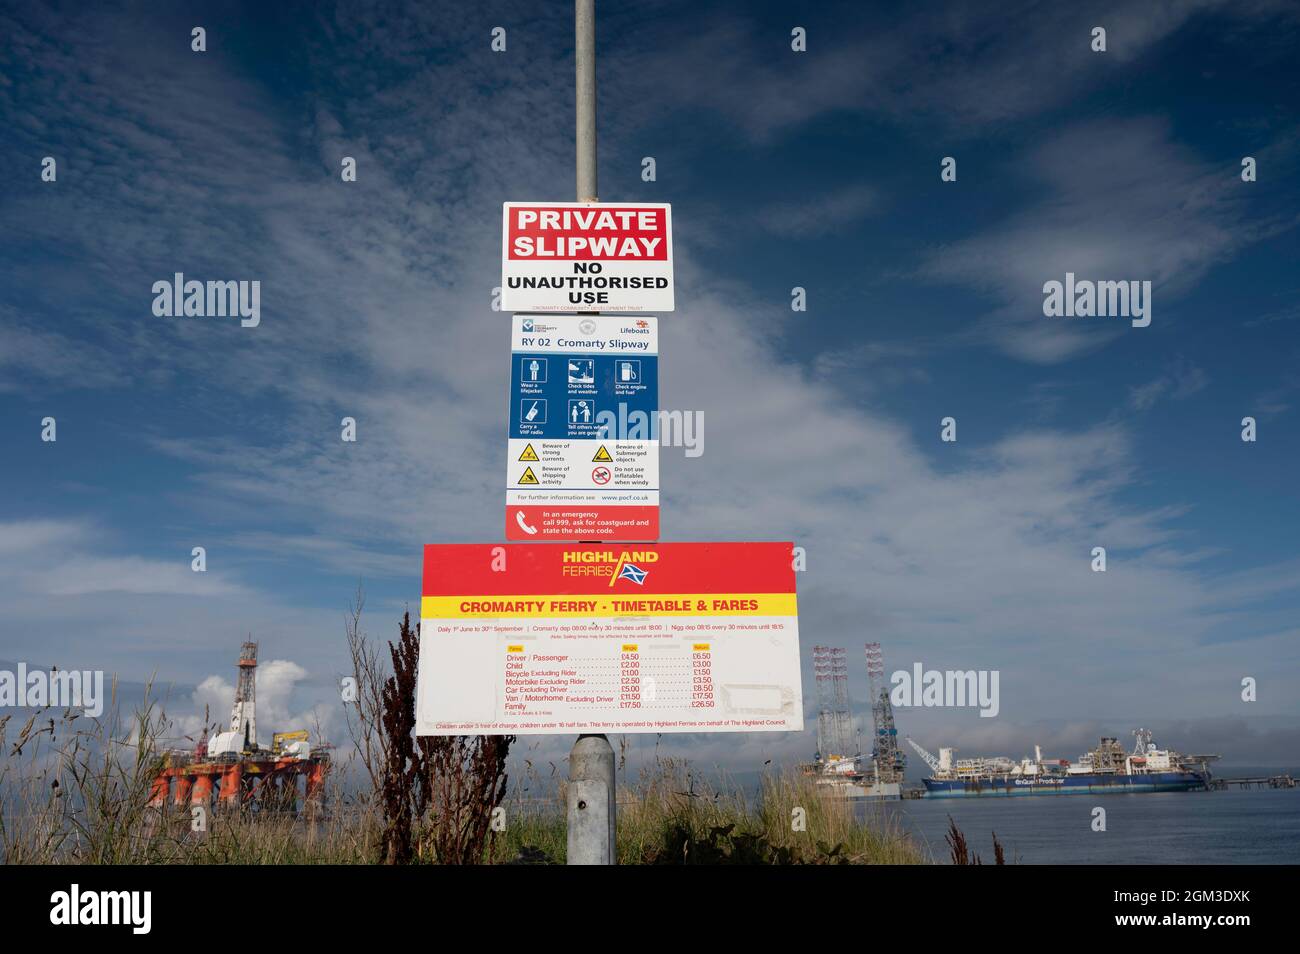 Signs for Highland Ferries, crossing from Cromarty to Nigg. Timetable, private slipway notice and prices. Sunny day with blue sky and clouds. Stock Photo